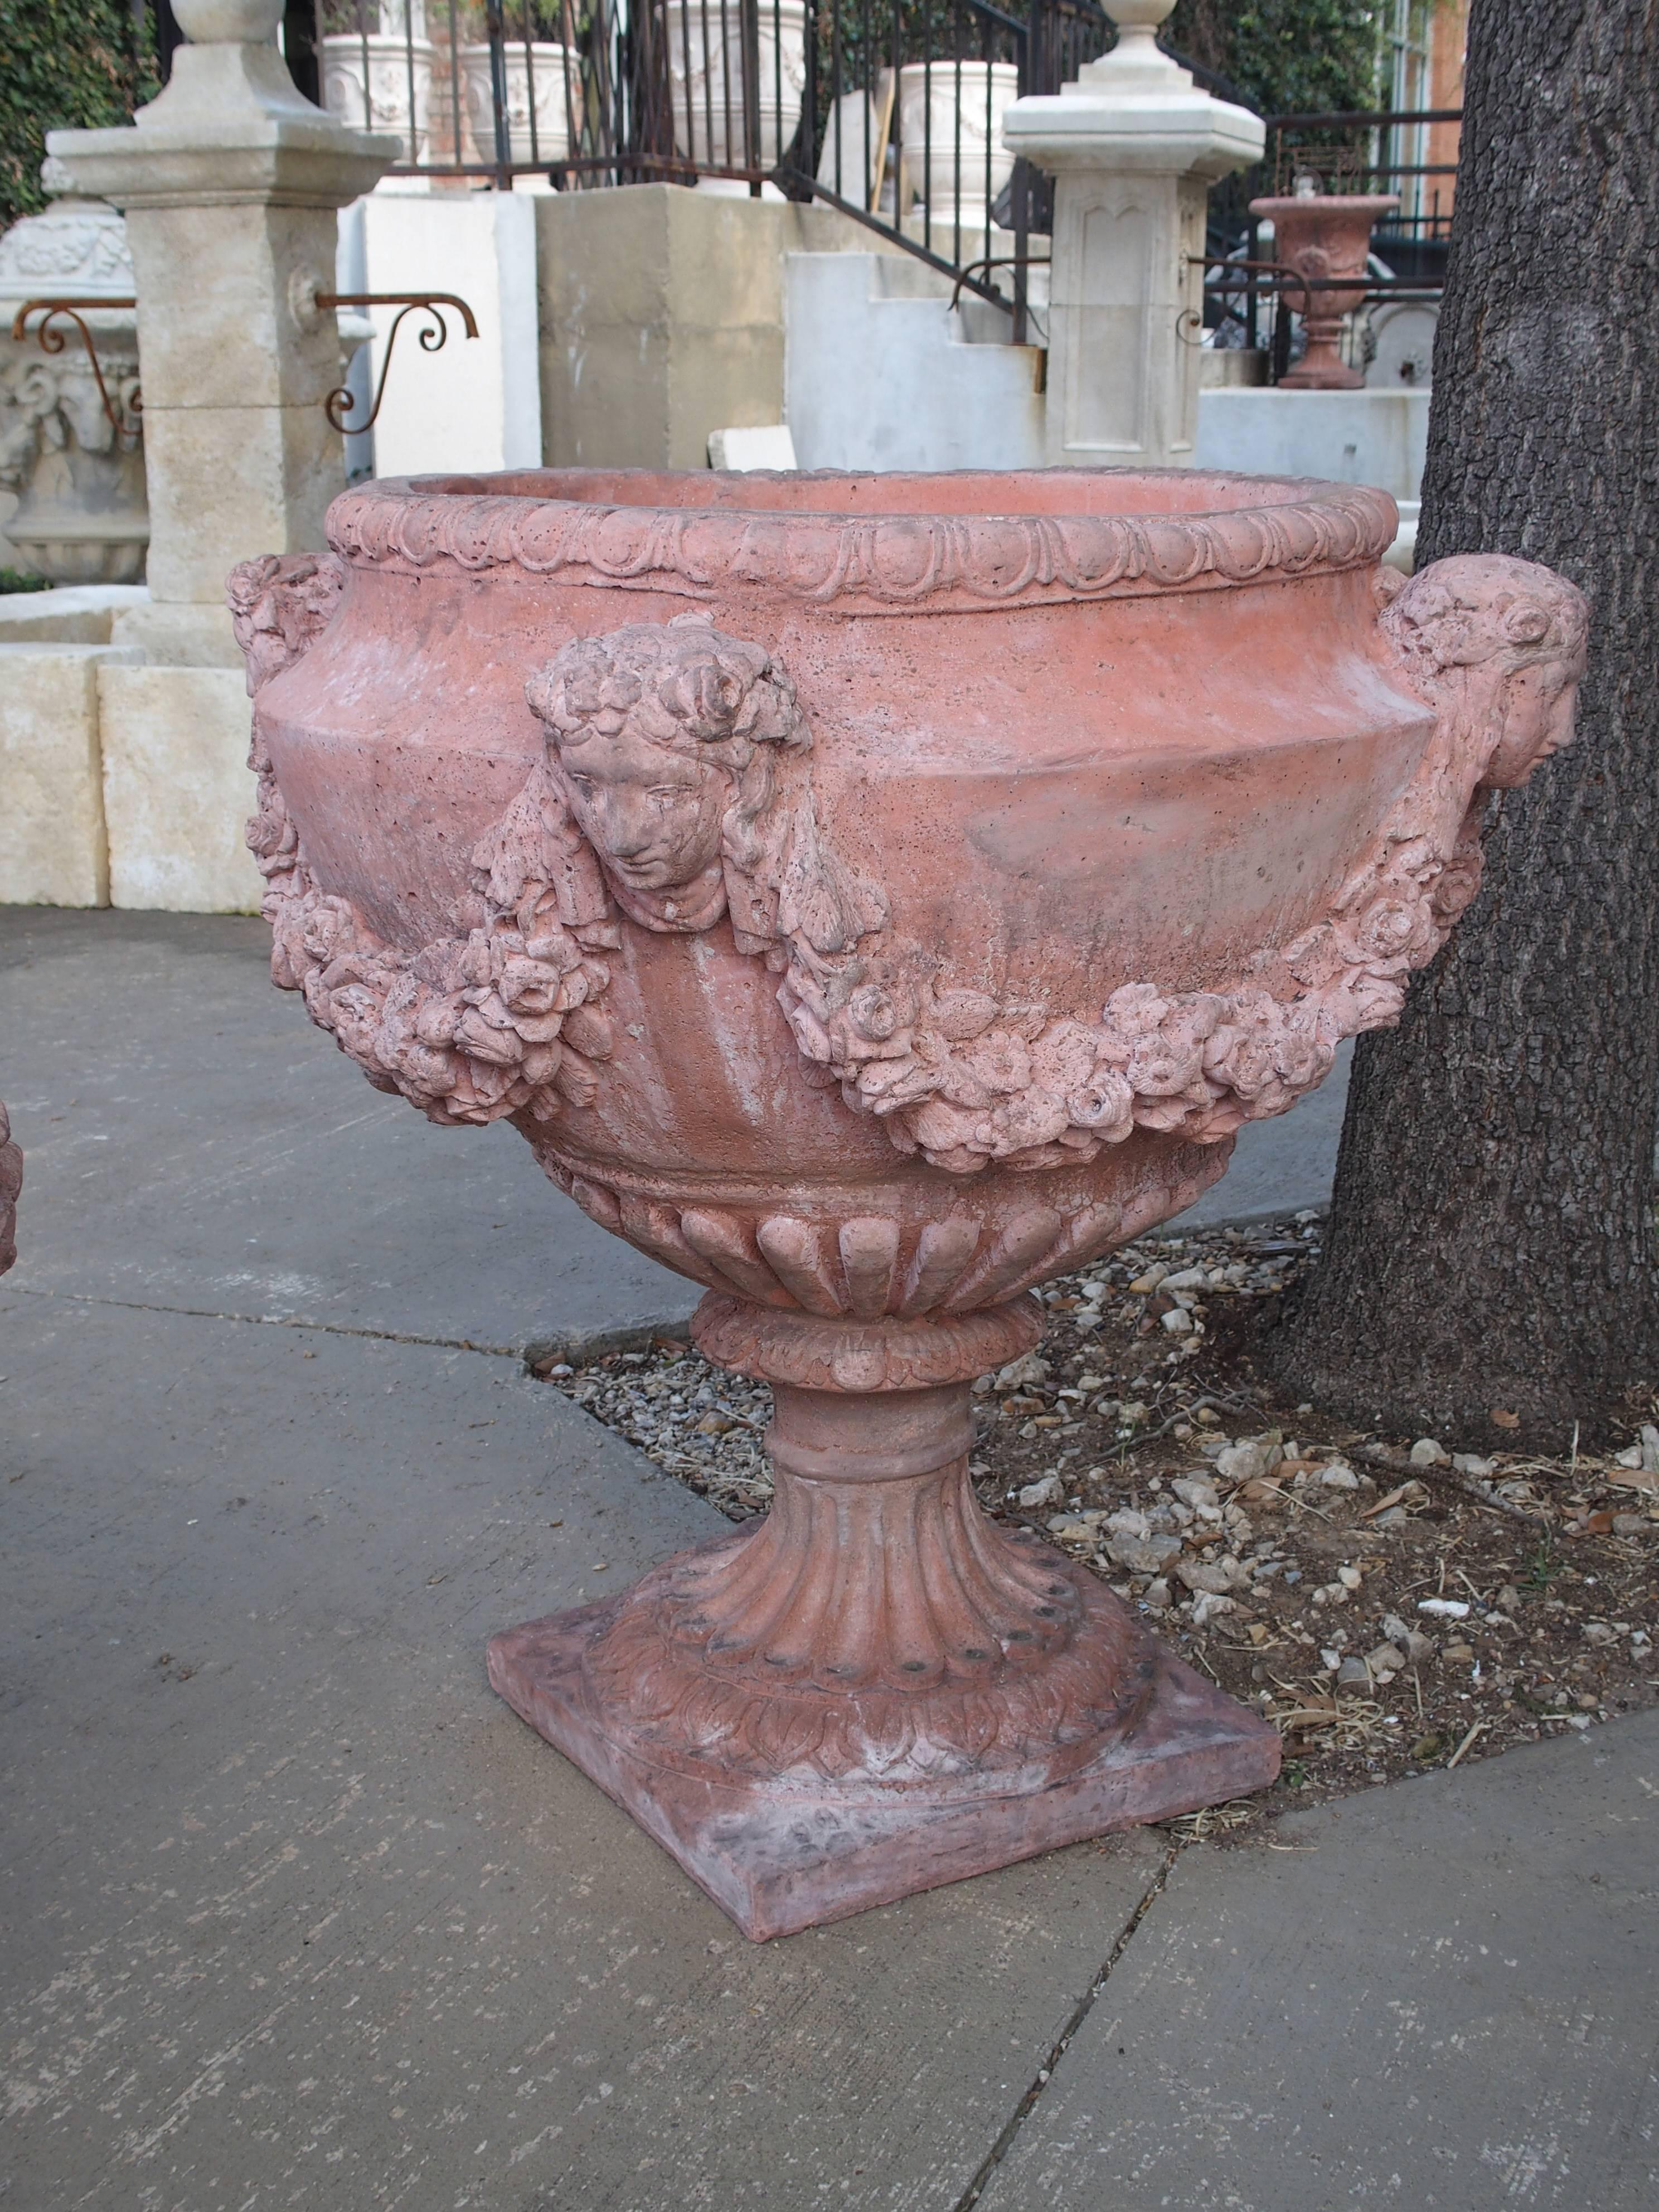 These large, cast stone urns have been made with a mixture of crushed limestone, bluestone and cement. The terracotta color has been mixed in with the stone, not applied. They have beautifully detailed floral swags flowing from four female masks.